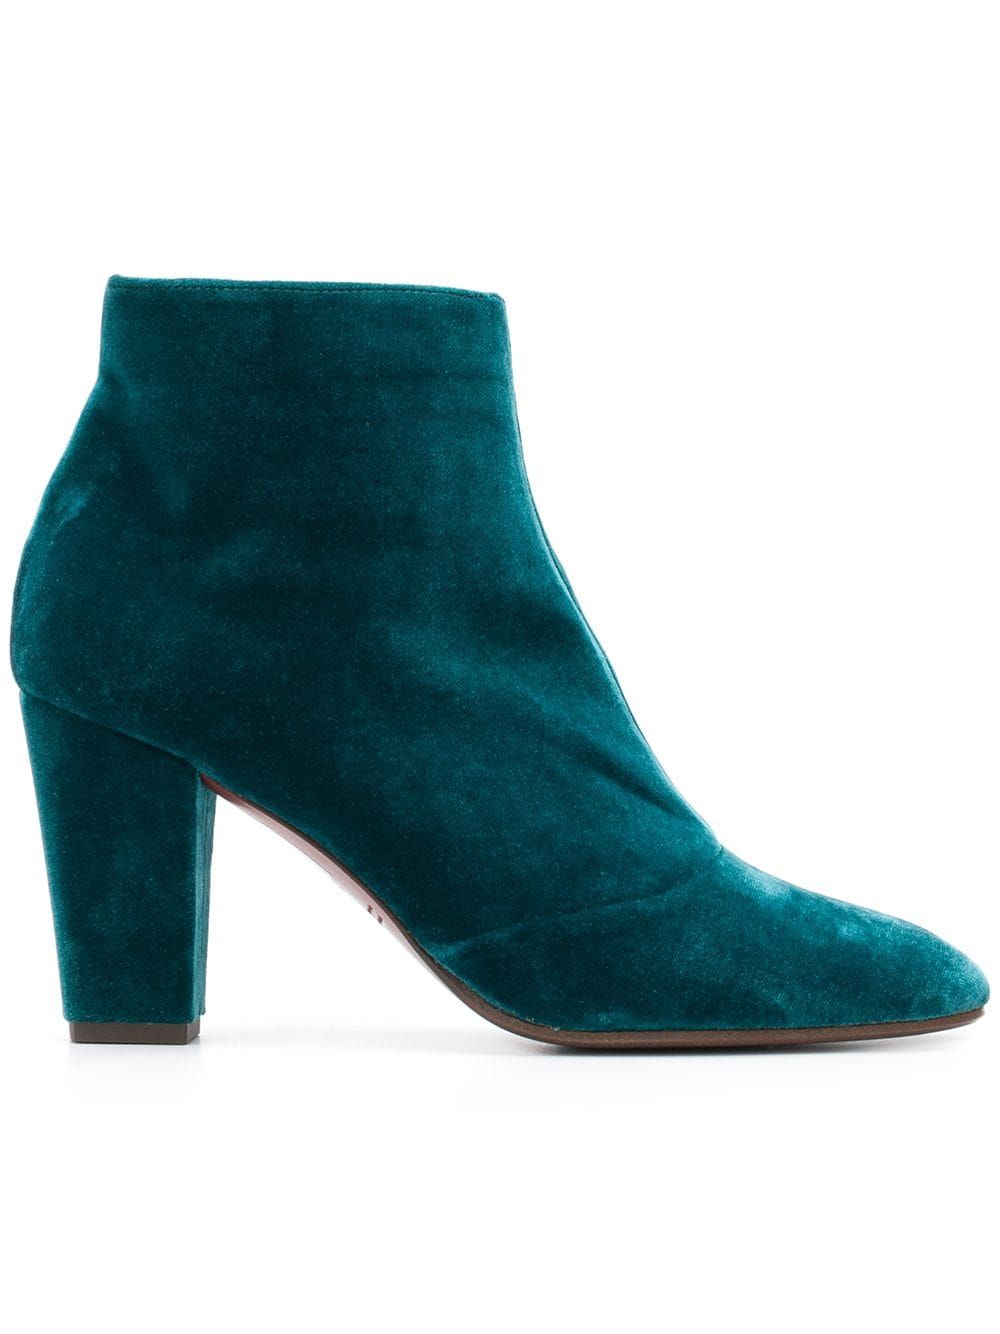 Chie Mihara Hibo heeled ankle boots - Green | FarFetch Global